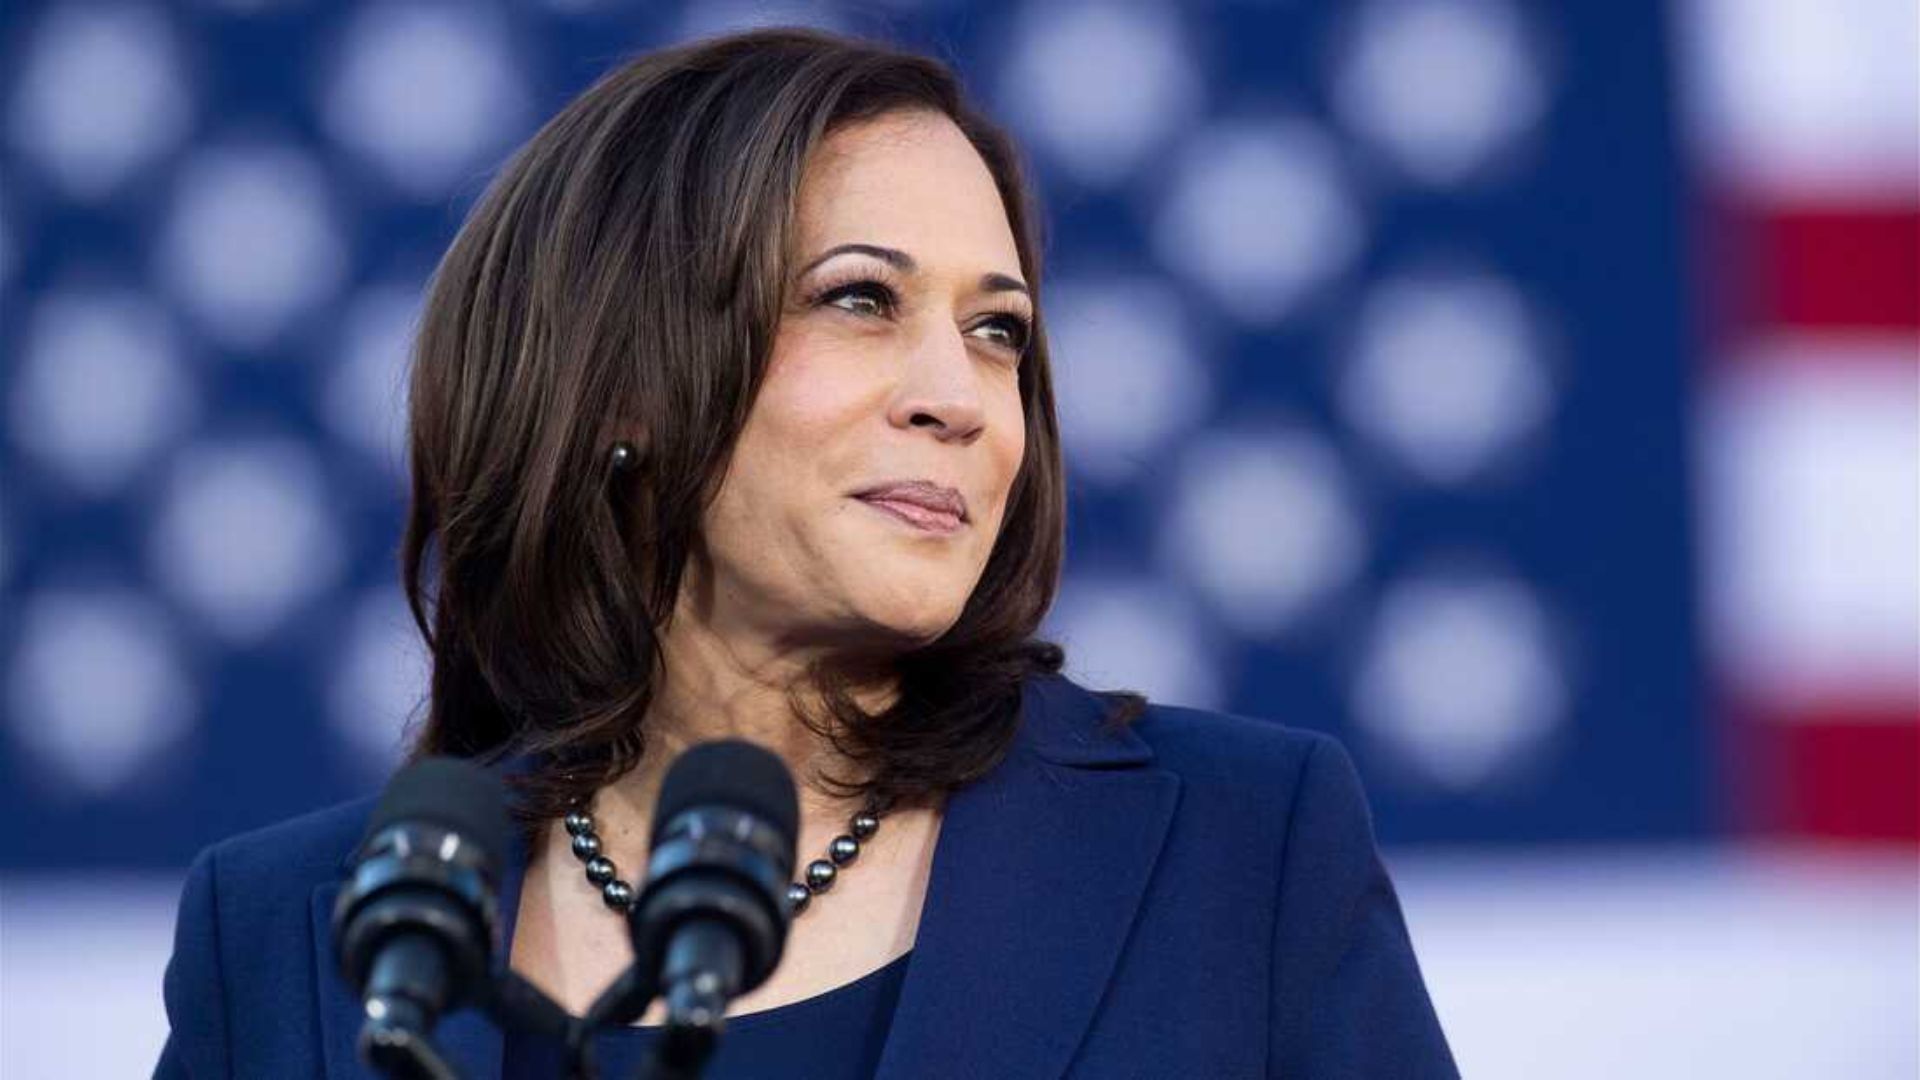 Kamala Harris labels Donald Trump a “threat” to democracy and basic freedoms in the US